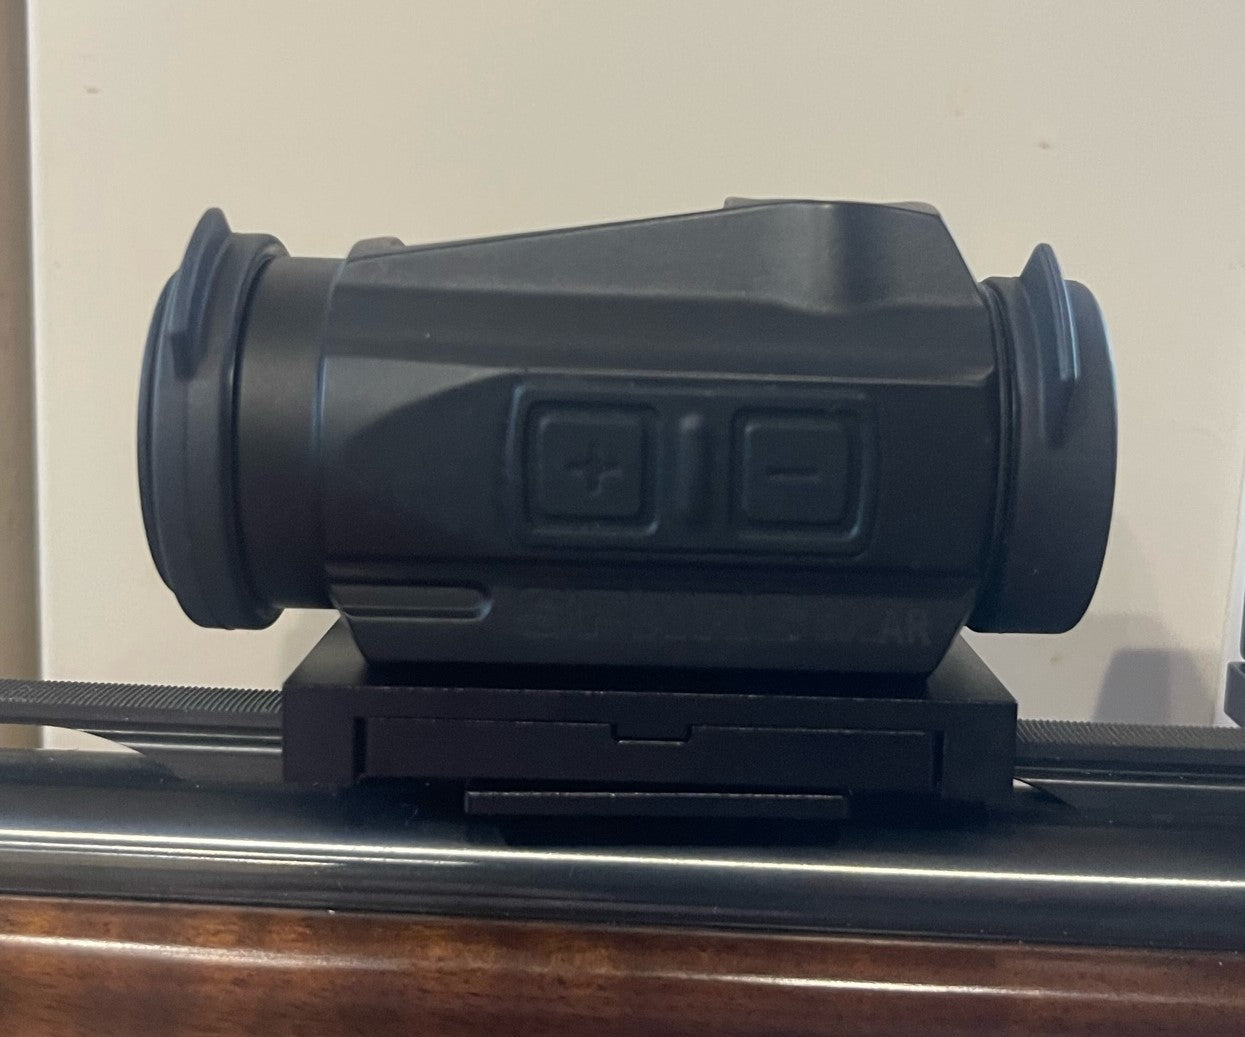 Mount Package Deal - Mount + Optic